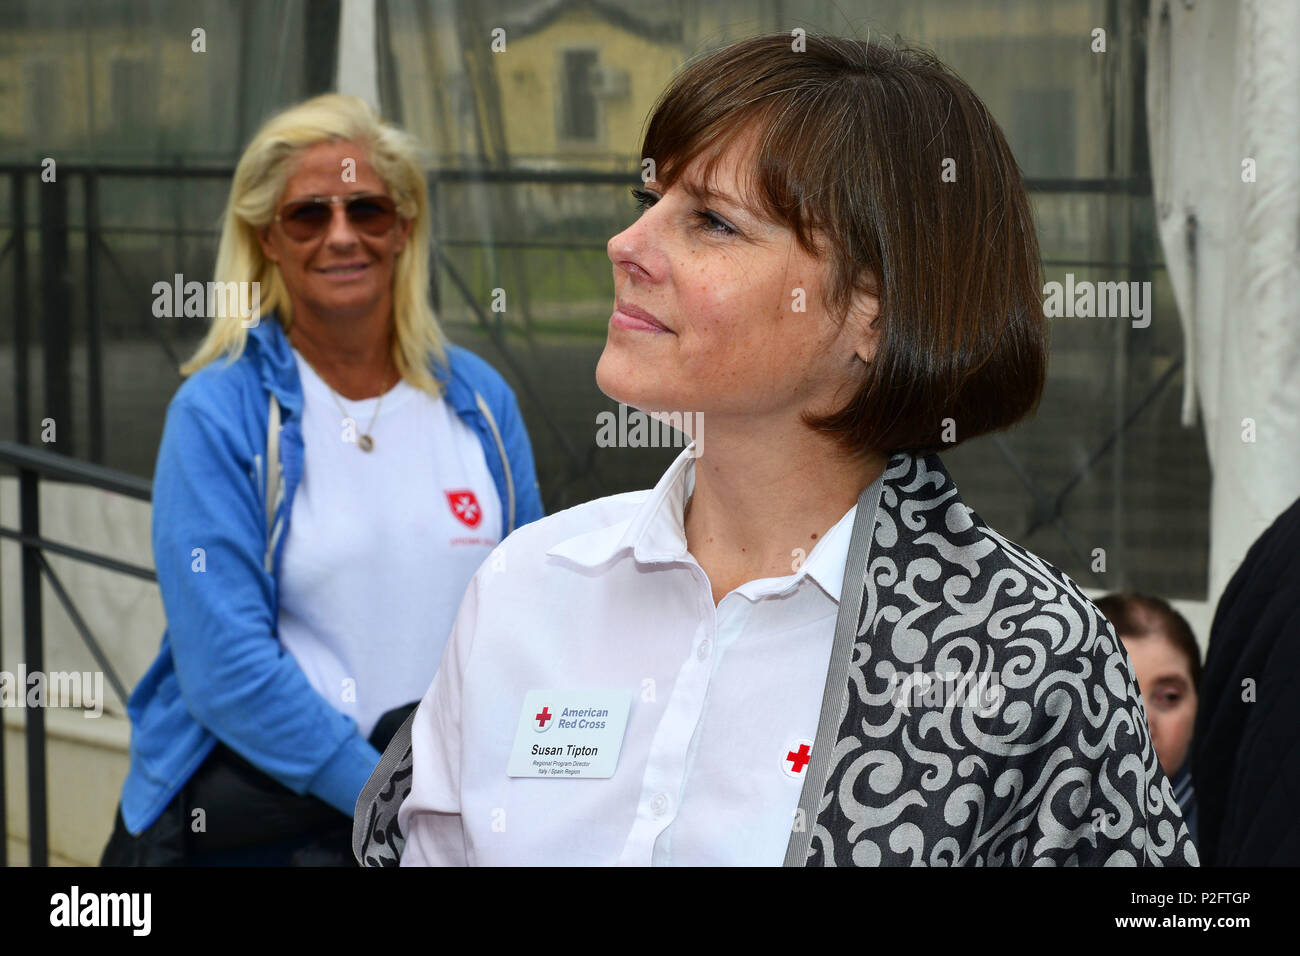 Ms. Susan Tipton, Regional Program Director Italy/Spain Region, of the American Red Cross ,during visit of the Delegation of Sovereign Military Order of Malta at caserma Ederle, 22 Sept. 2016, Vicenza, Italy. The Sovereign Military Order of Malta (SMOM) or Order of Malta, is a Roman Catholic  Religious Order traditionally of military, chivalrous and noble nature for defense of Catholic faith and assistance to the poor. (U.S. Army photo by Visual Information Specialist Paolo Bovo/Released) Stock Photo